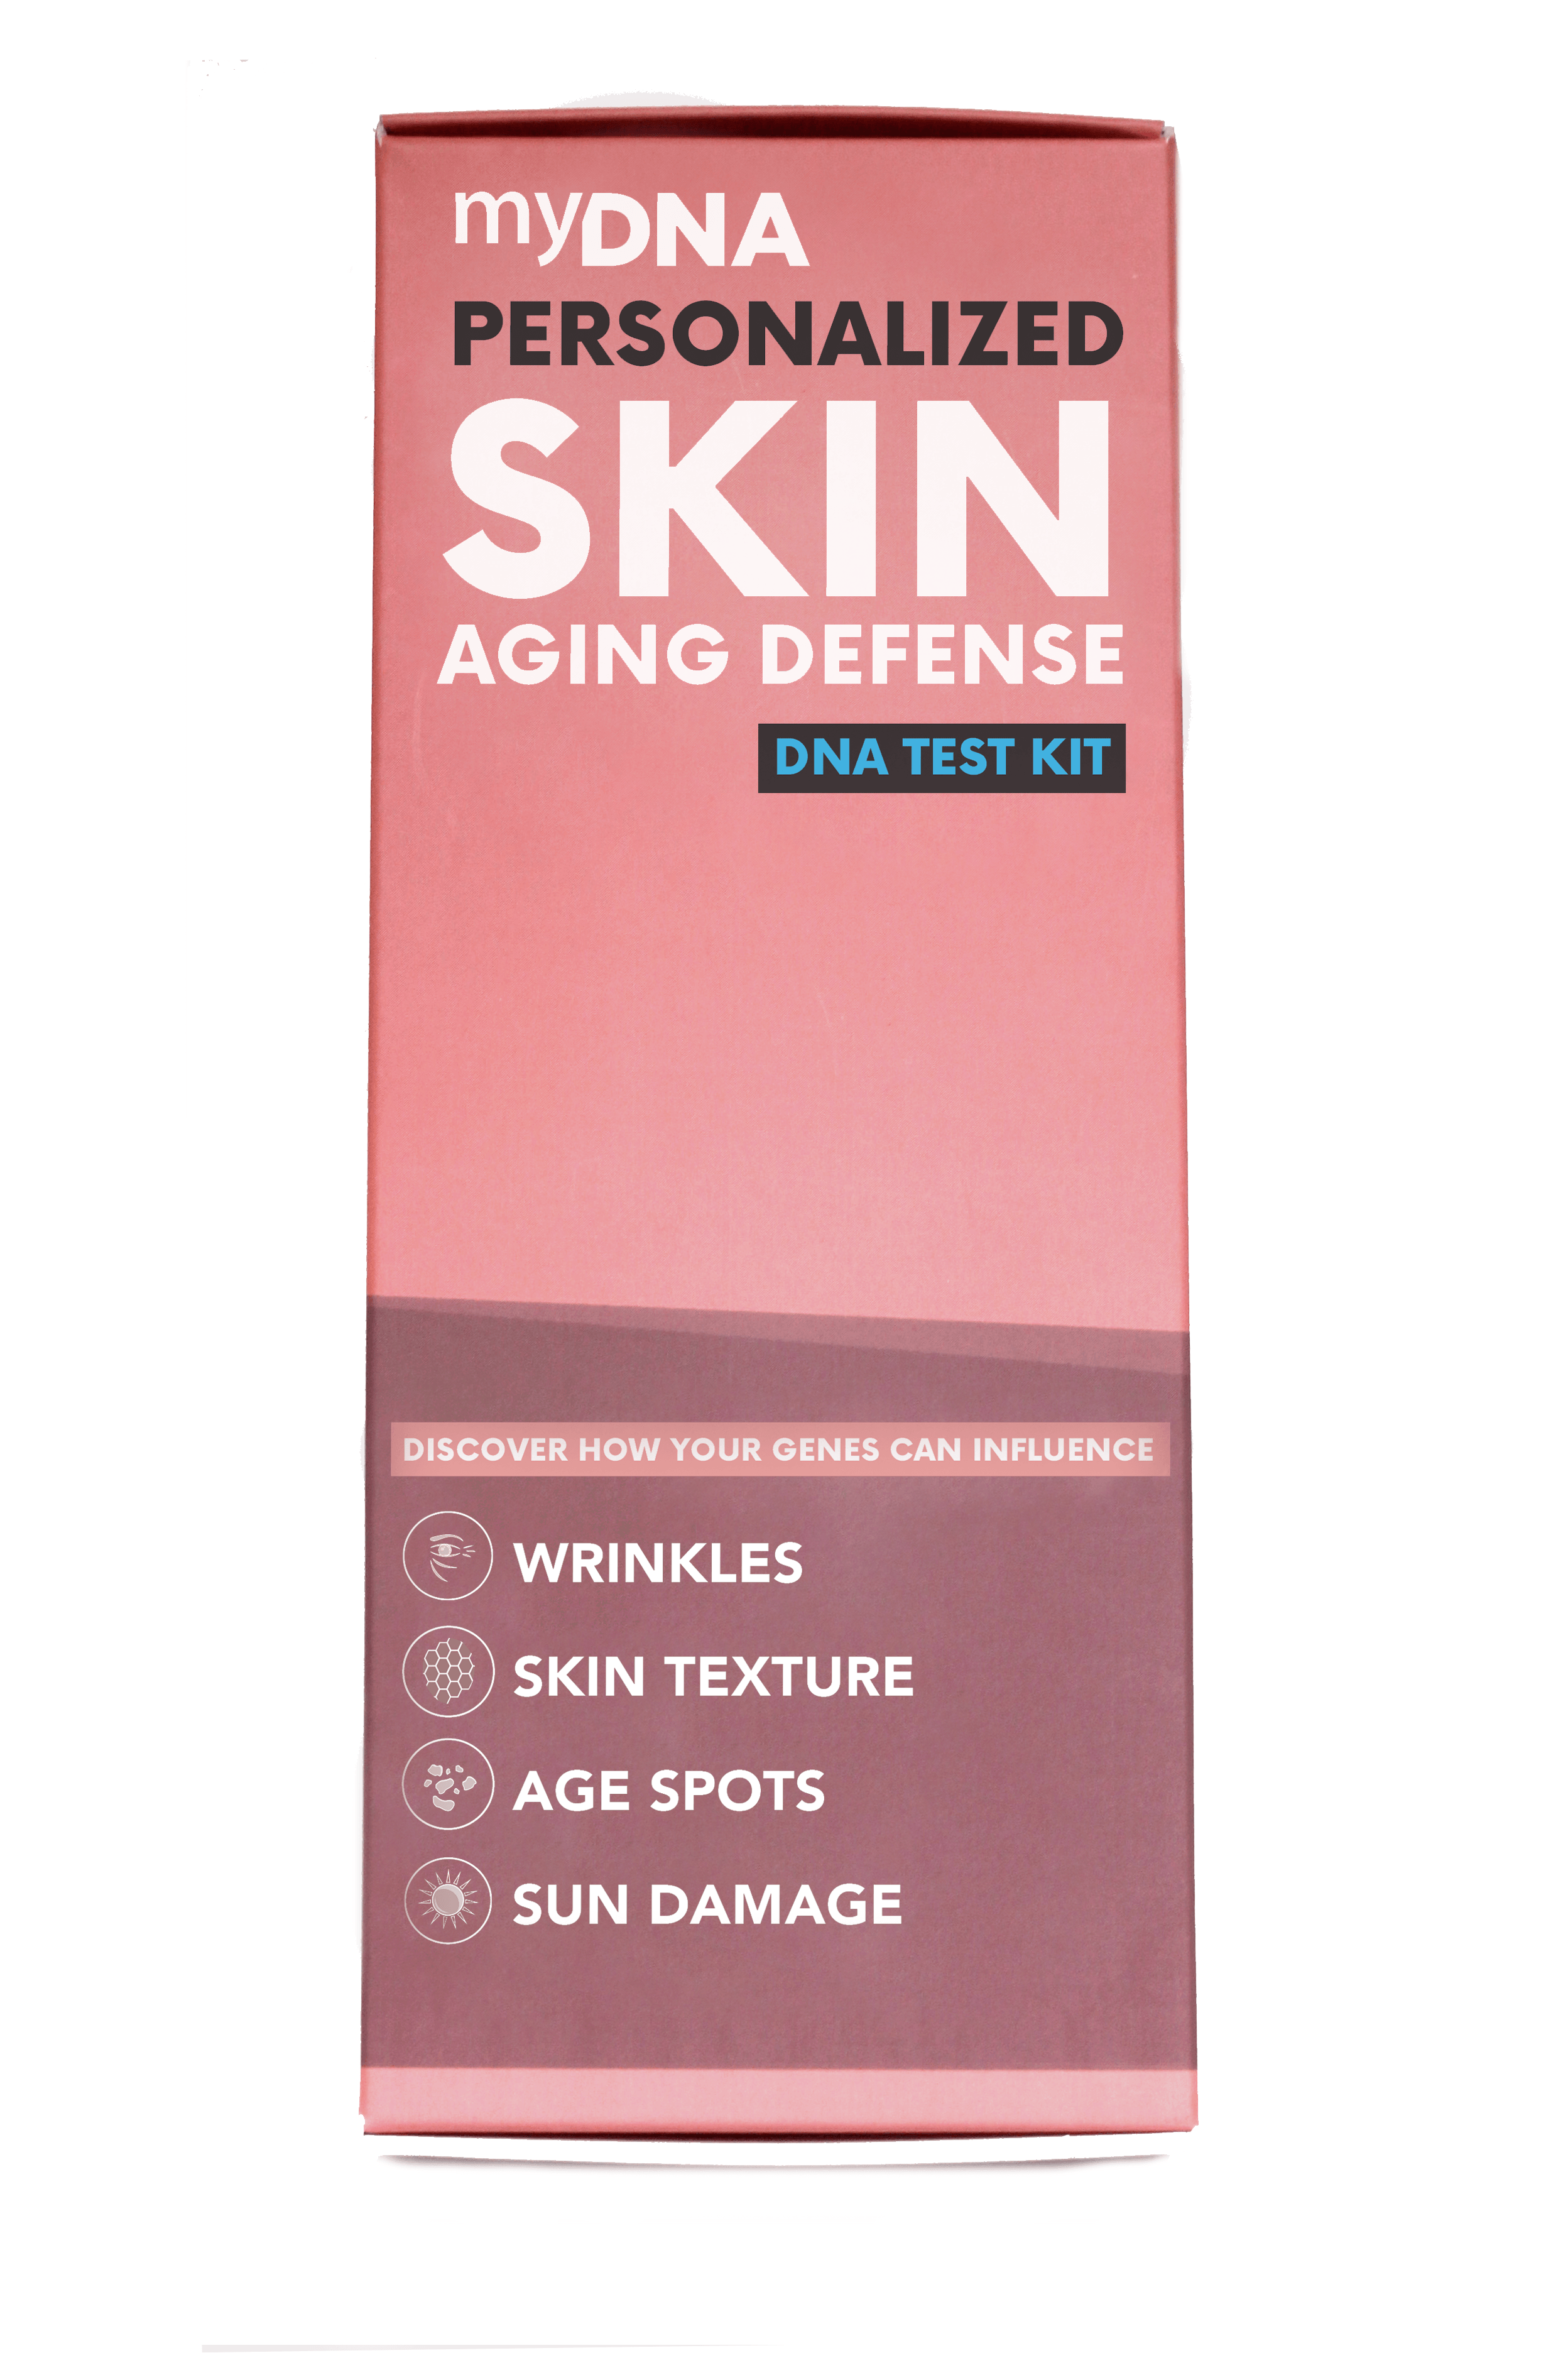 Personalized Skin Aging Defense